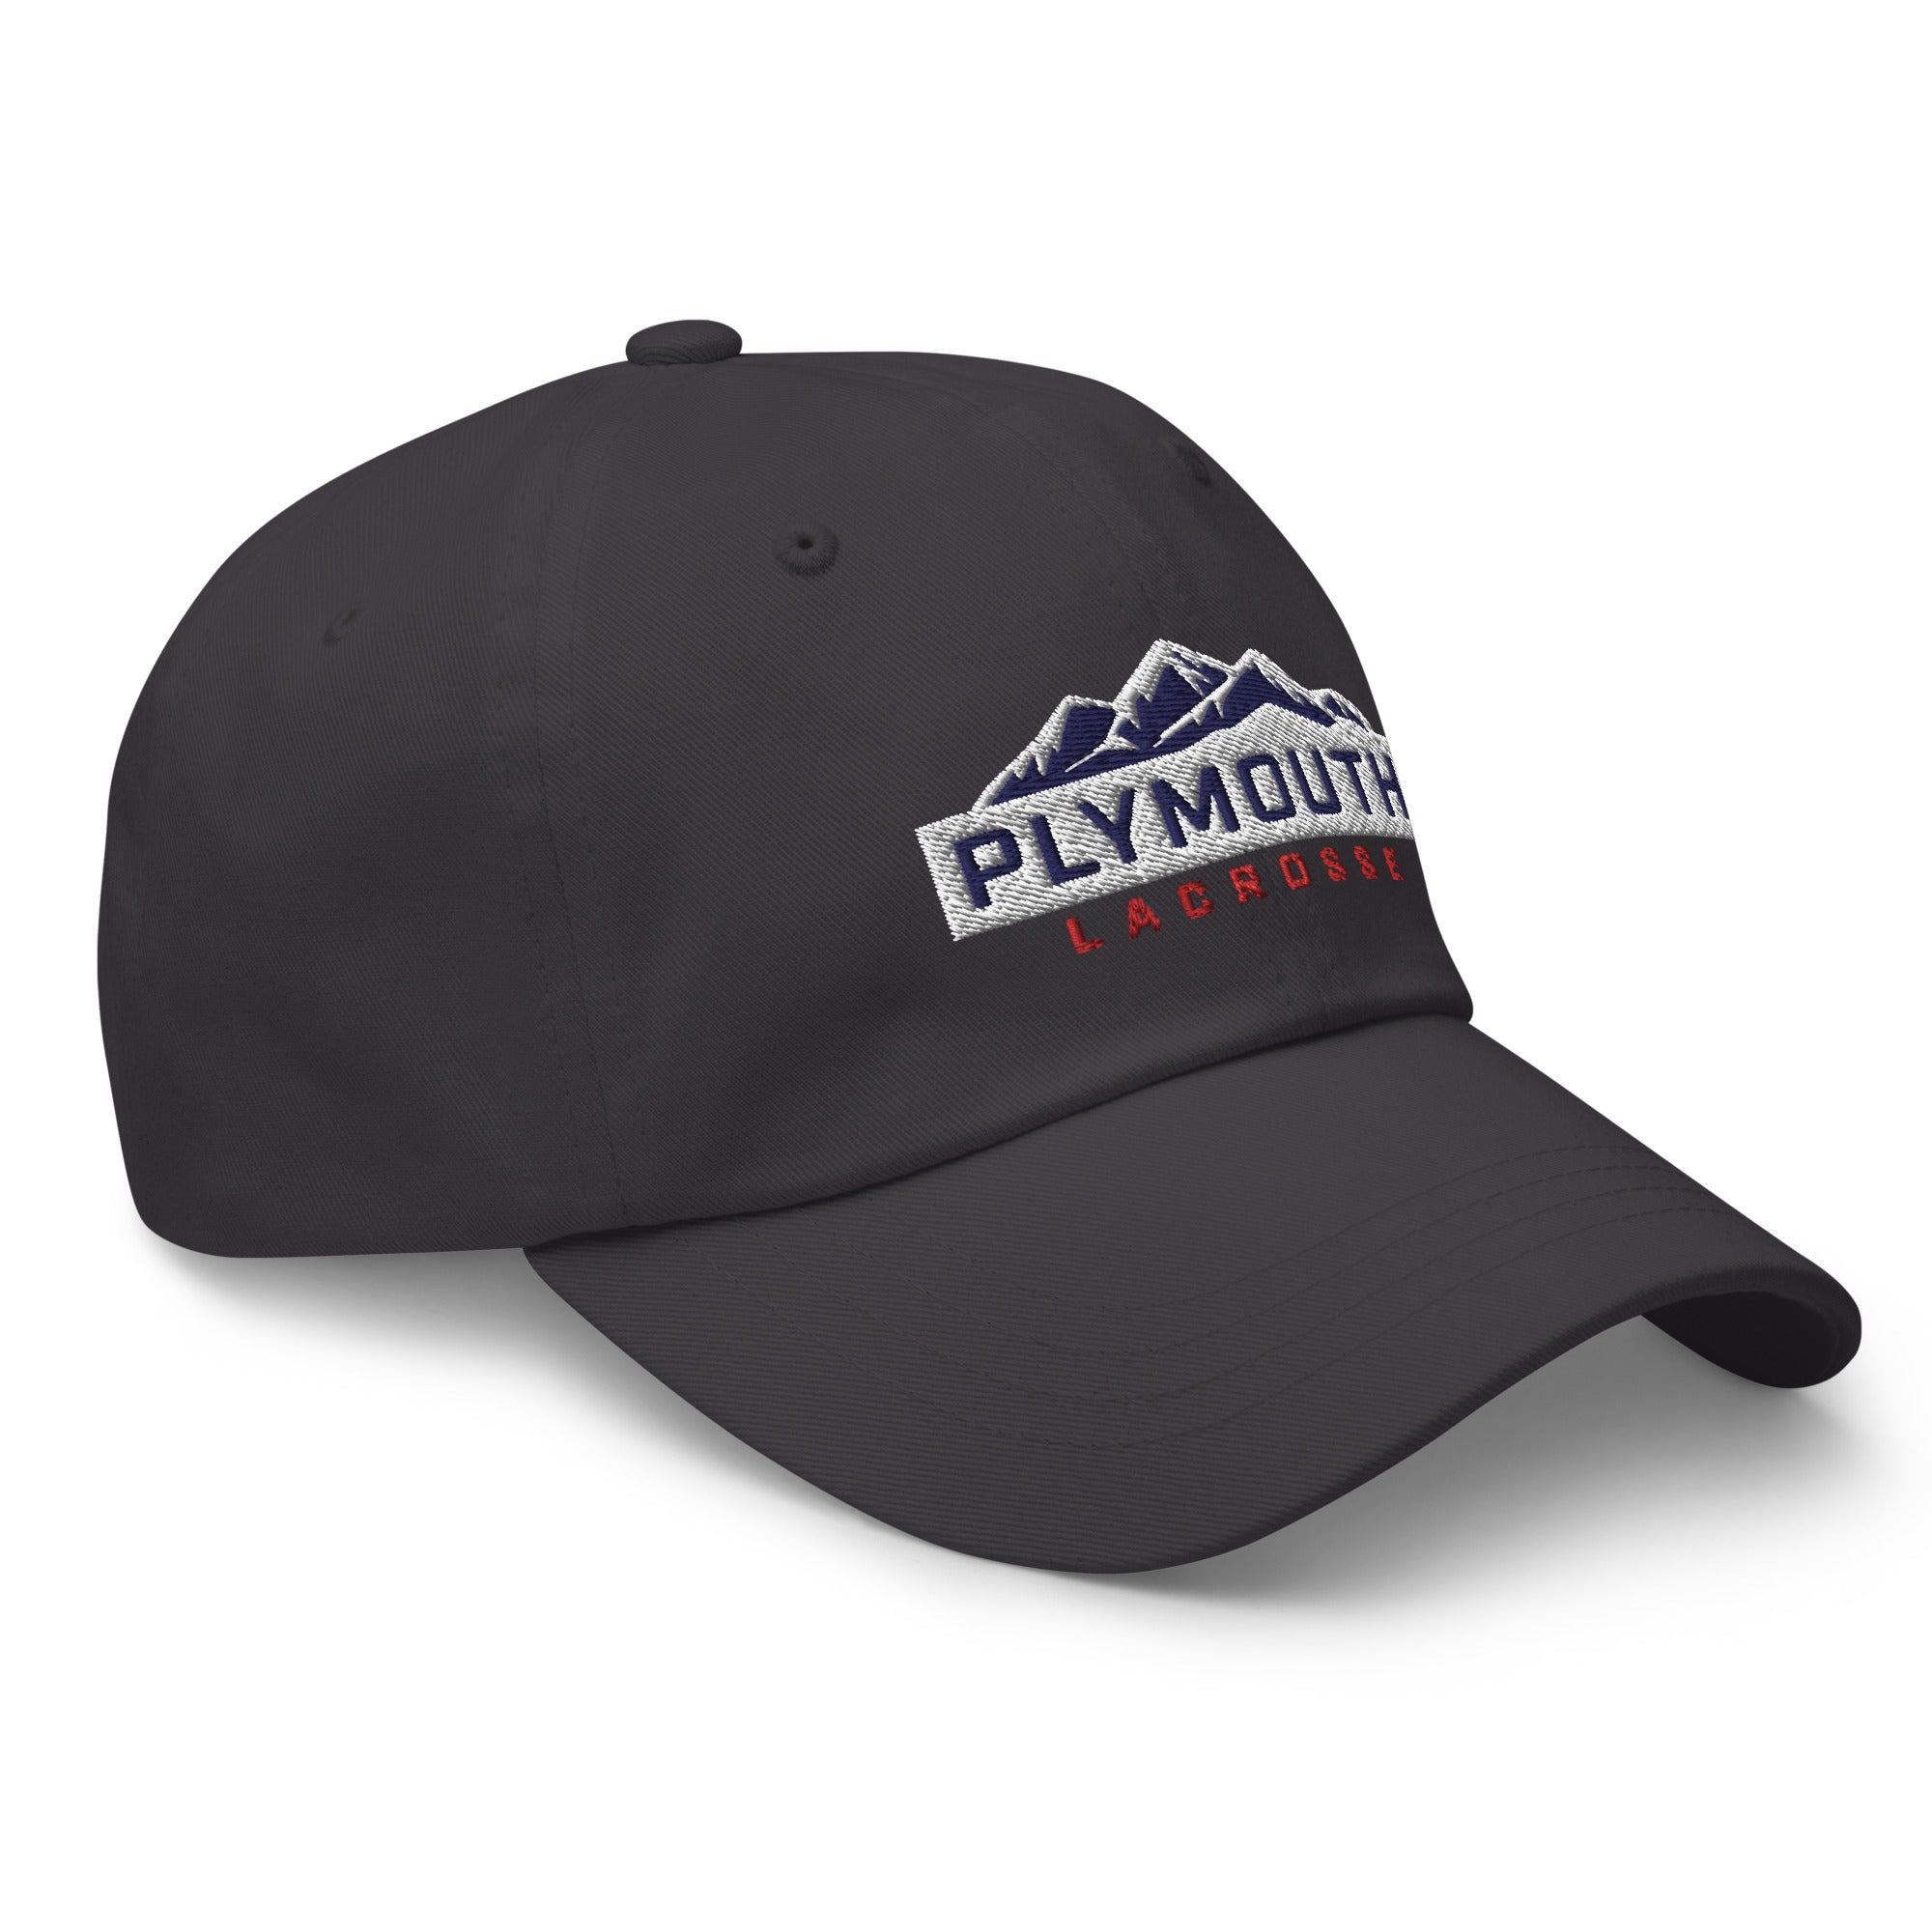 Plymouth Dad hat